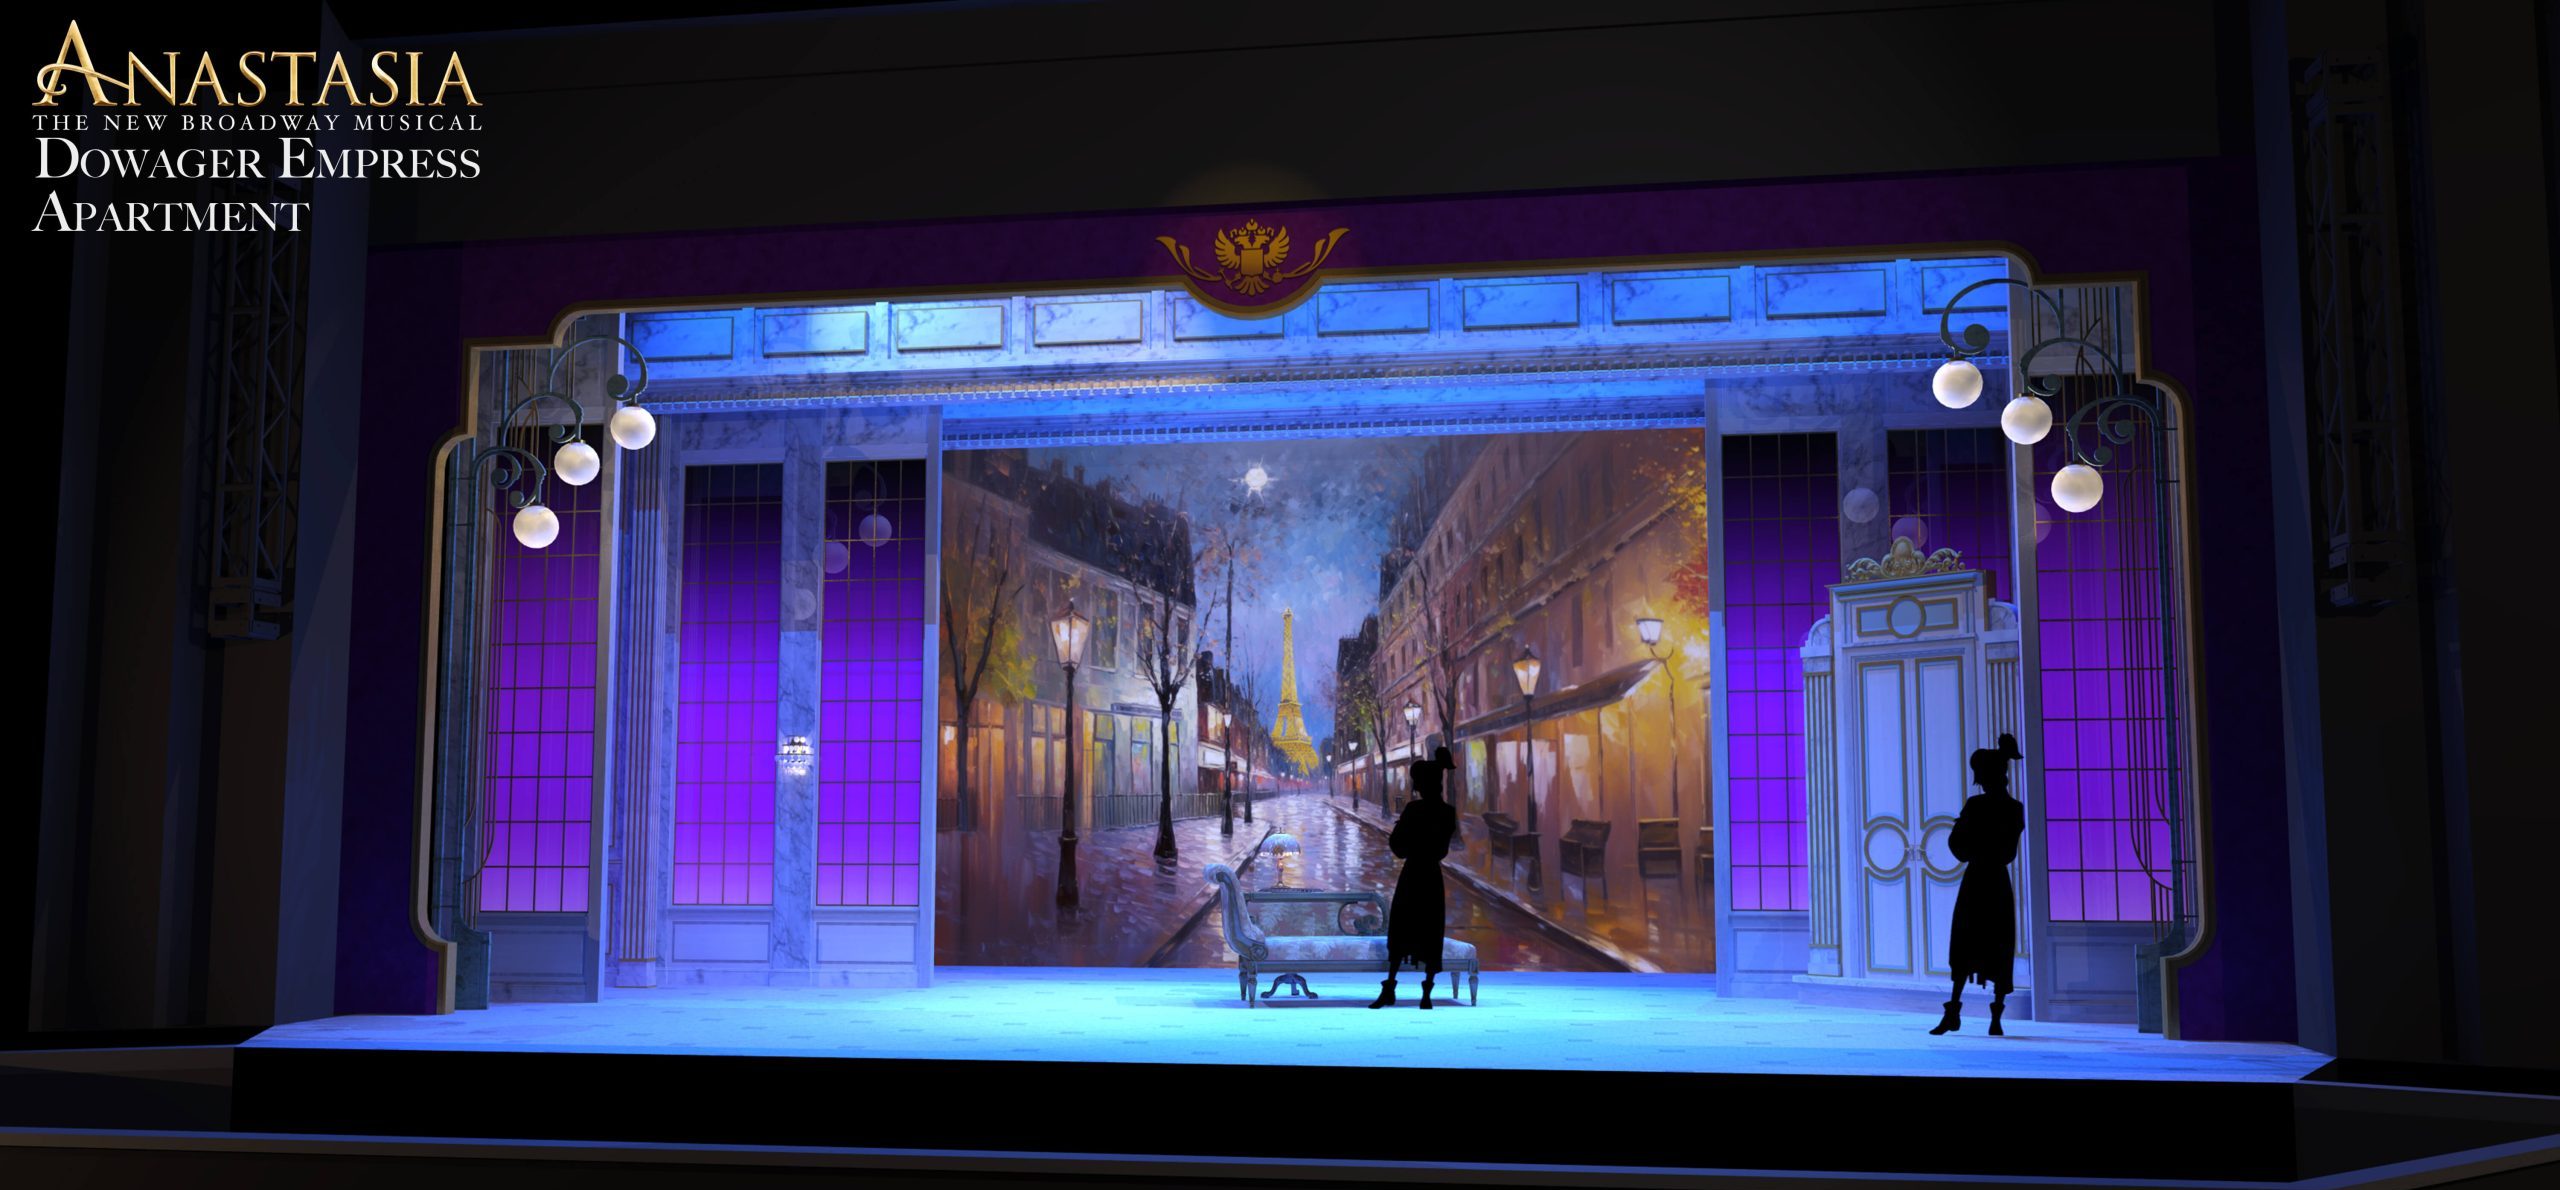 Anastasia scenery rental - Dowager Empress Apartment musical scene - Front Row Theatrical Rental